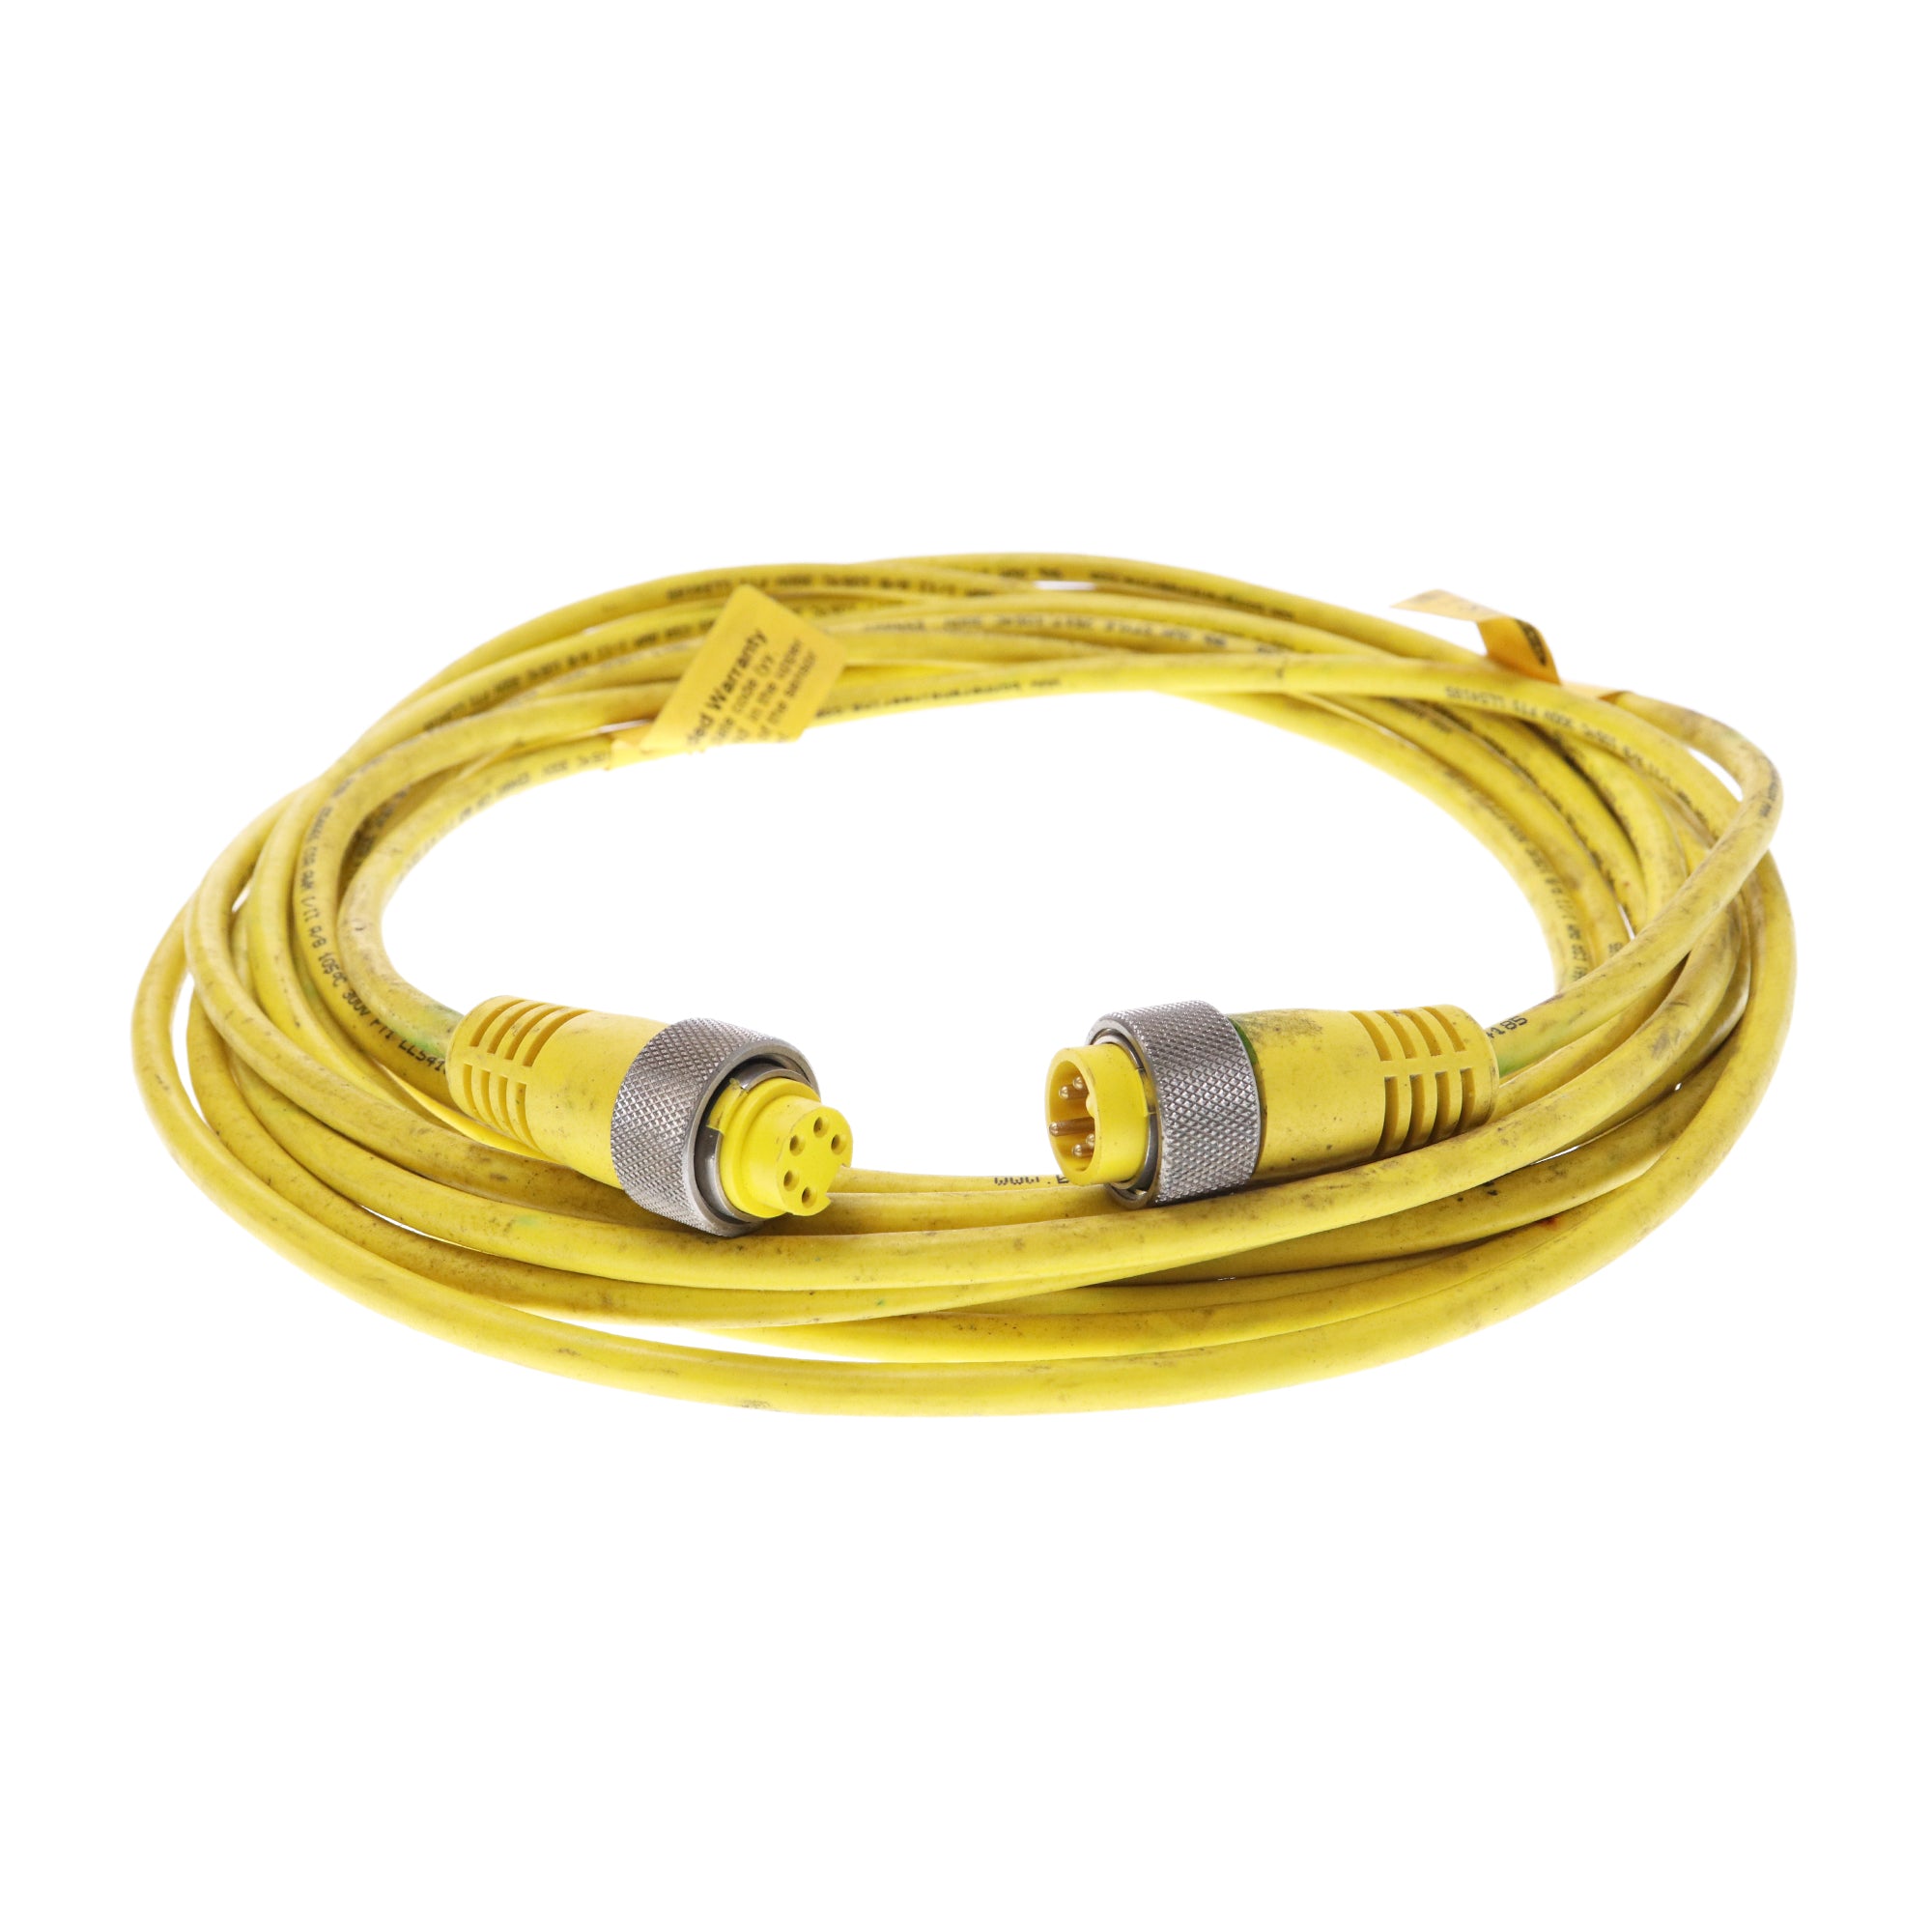 Banner, BANNER 58871 DEC1-525C 5-PIN MALE-FEMALE STRAIGHT CABLE ASSEMBLY, YELLOW